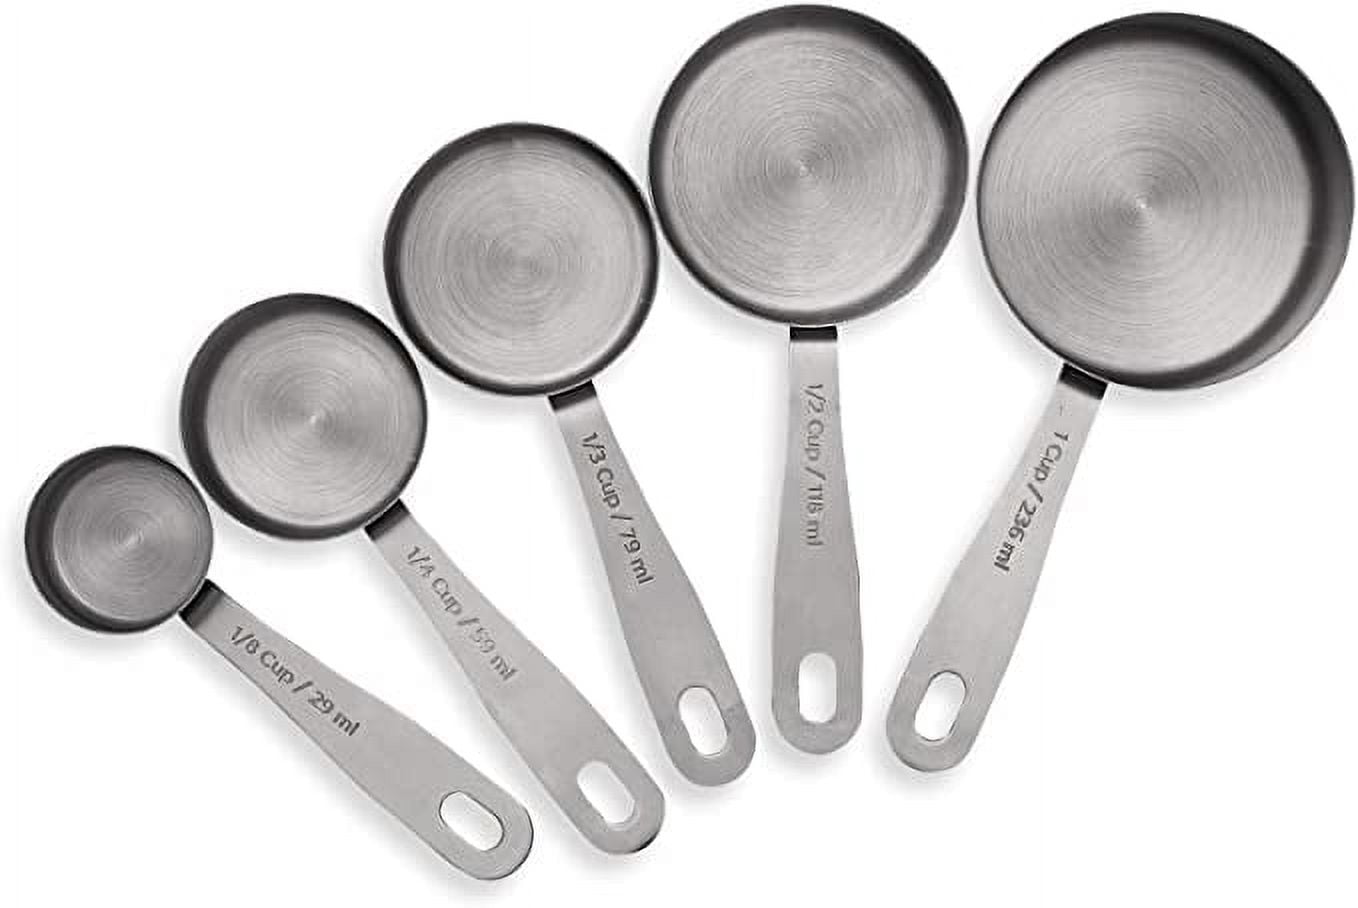 Slofoodgroup Measuring Cup Set - 7 Piece Stainless Steel Measuring Cups 